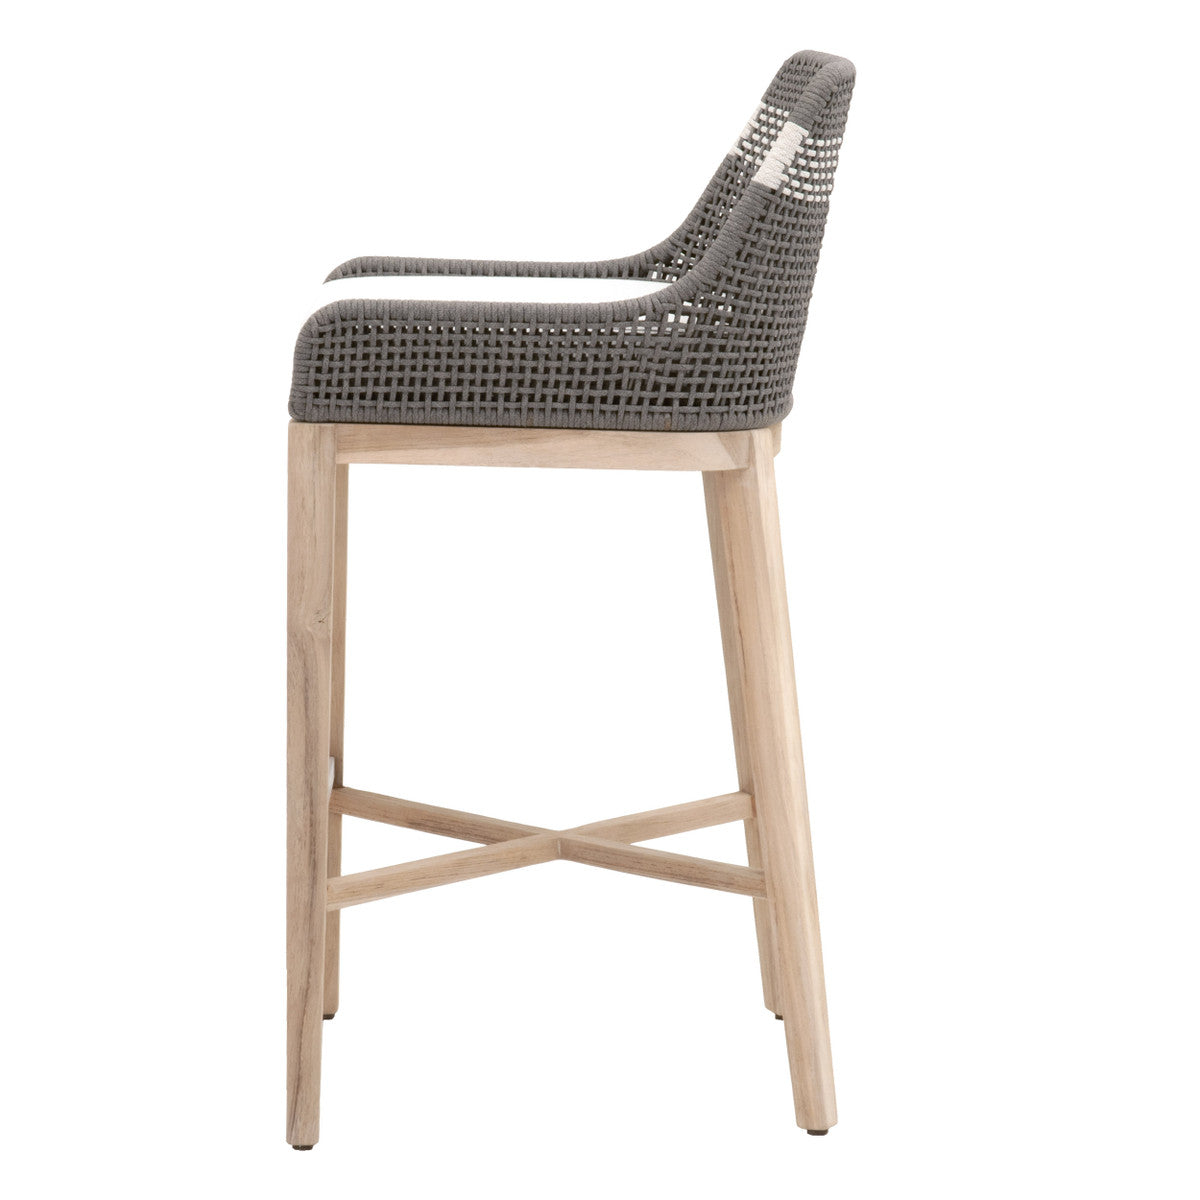 Tapestry Outdoor Barstool in Dove Flat Rope, White Speckle Stripe, Performance White Speckle, Gray Teak - 6850BS.DOV/WHT/GT